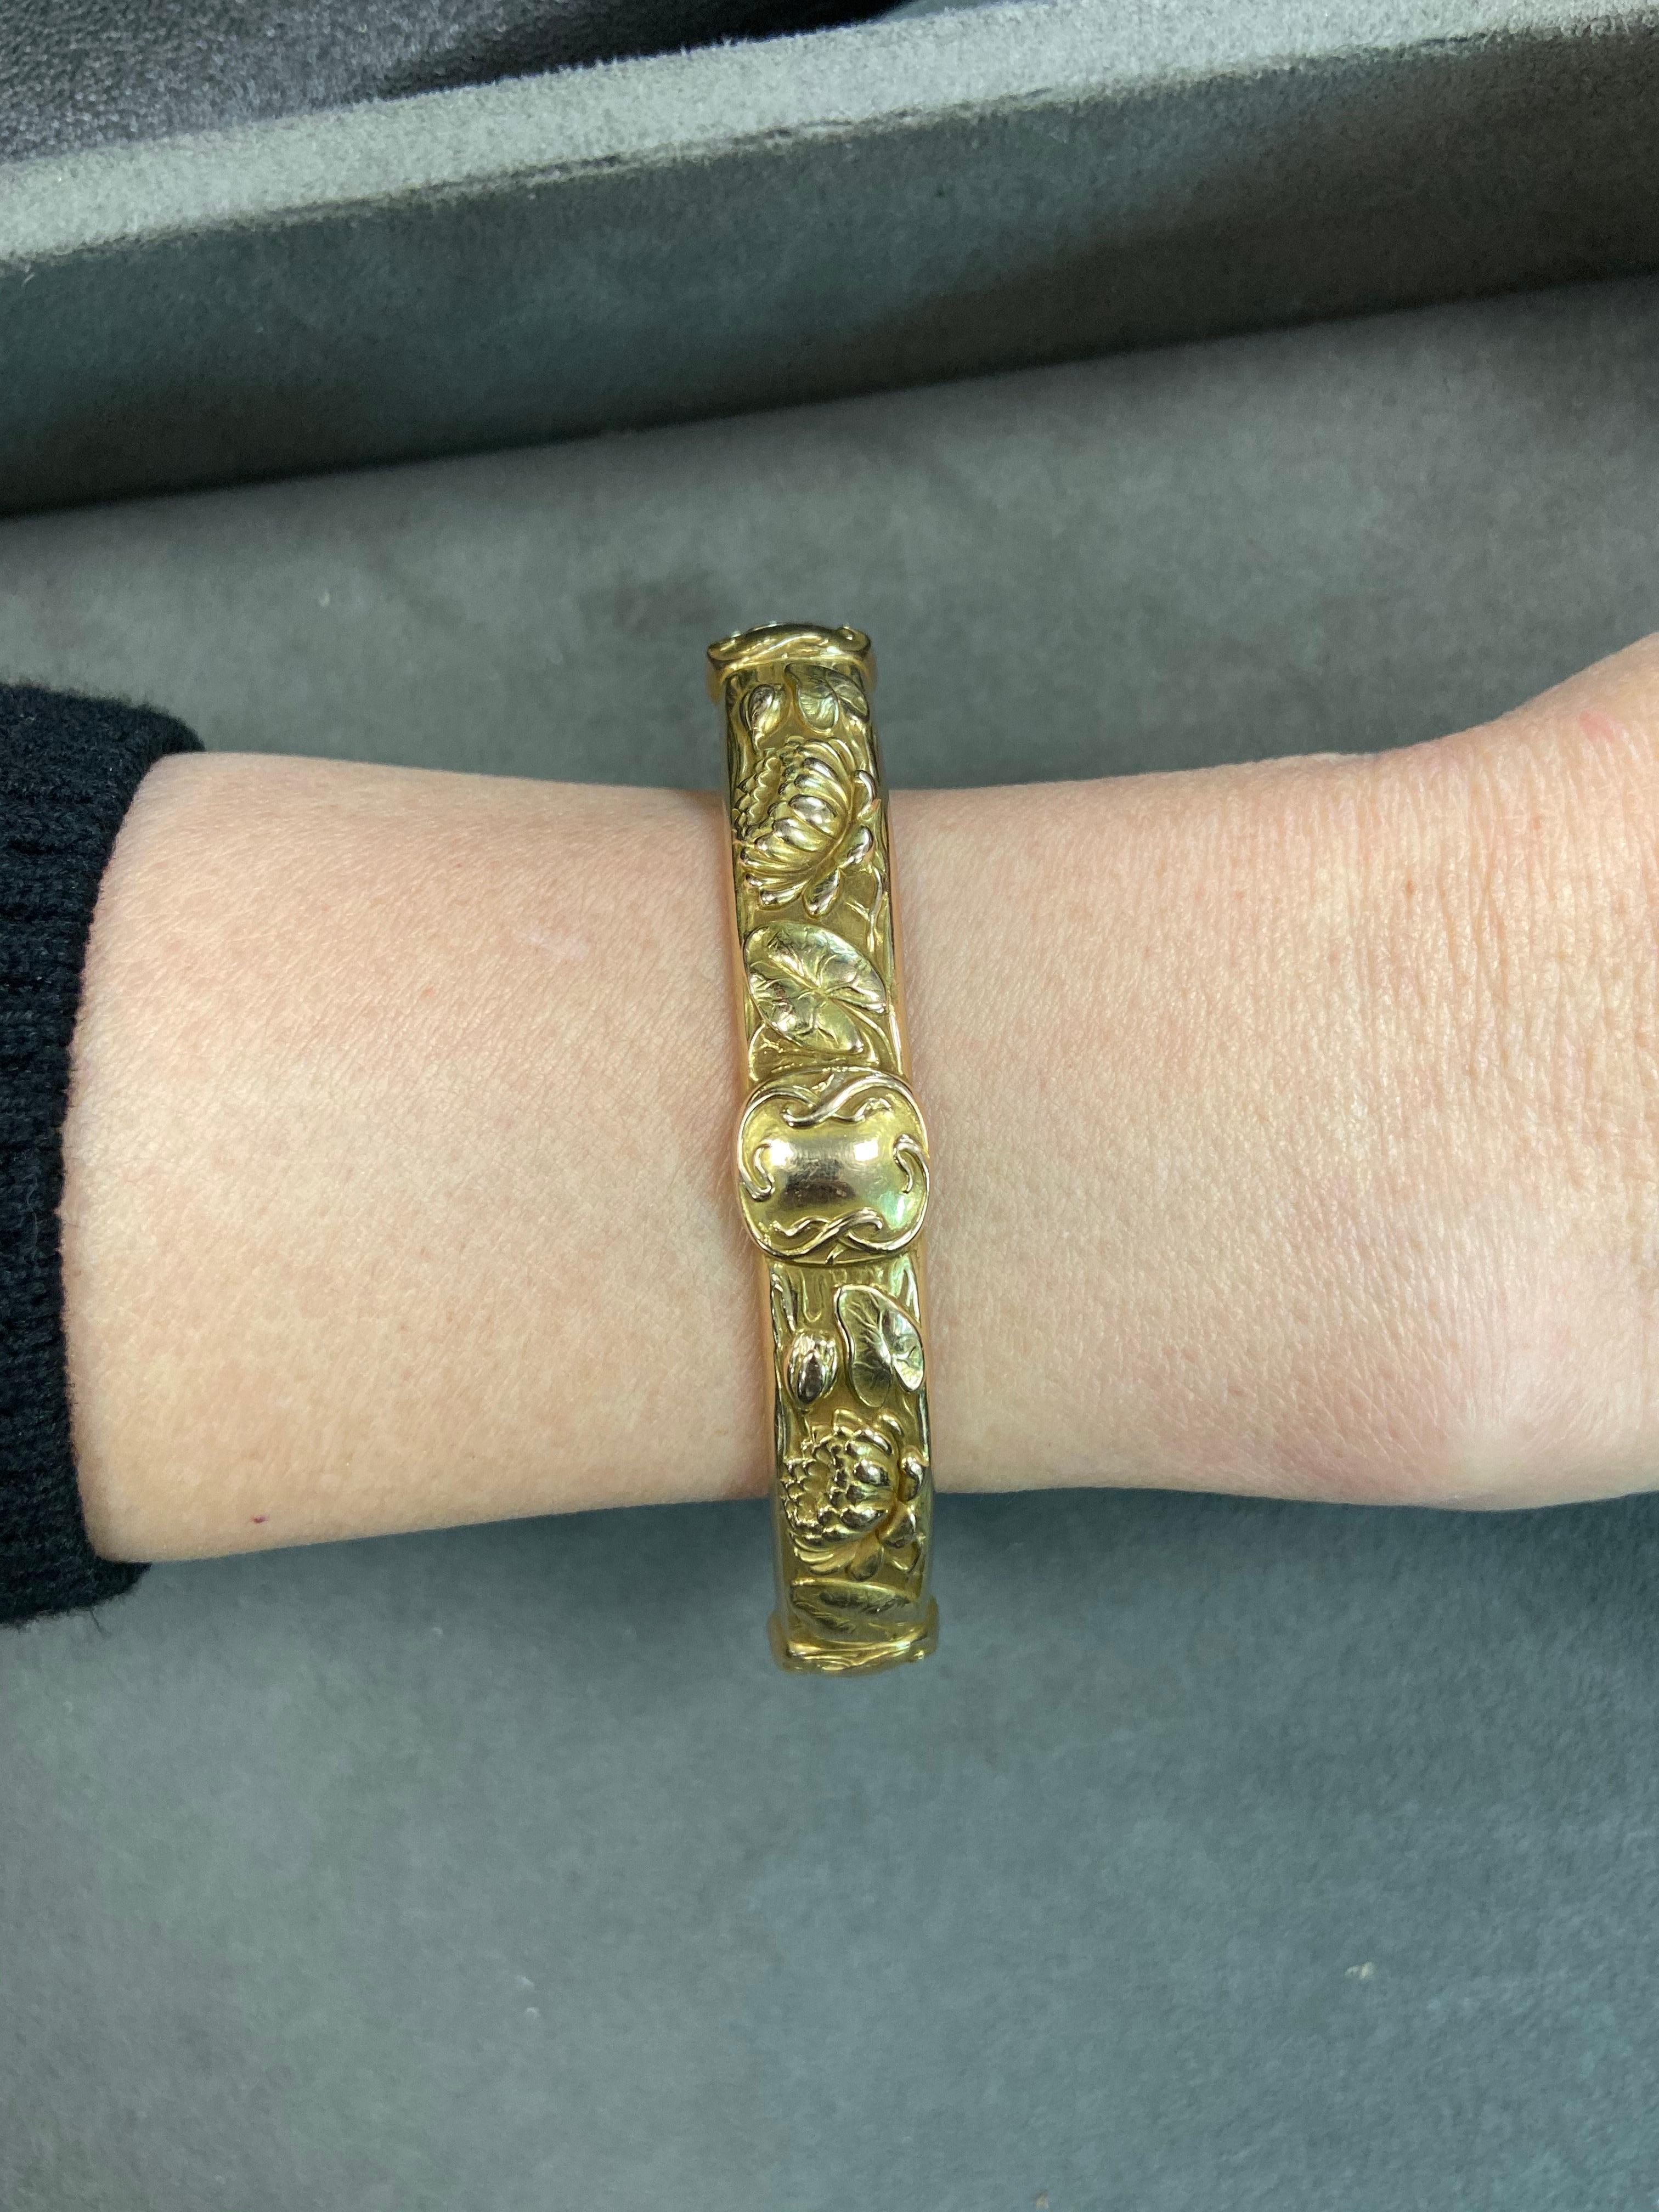 A 14 karat yellow gold hollowform bangle with lotus flower motifs bears makers marks for Riker Bros, a company based out of Newark, NJ. The bracelet is 7/16 inch wide and has an inner circumference of 7-1/2 inches.